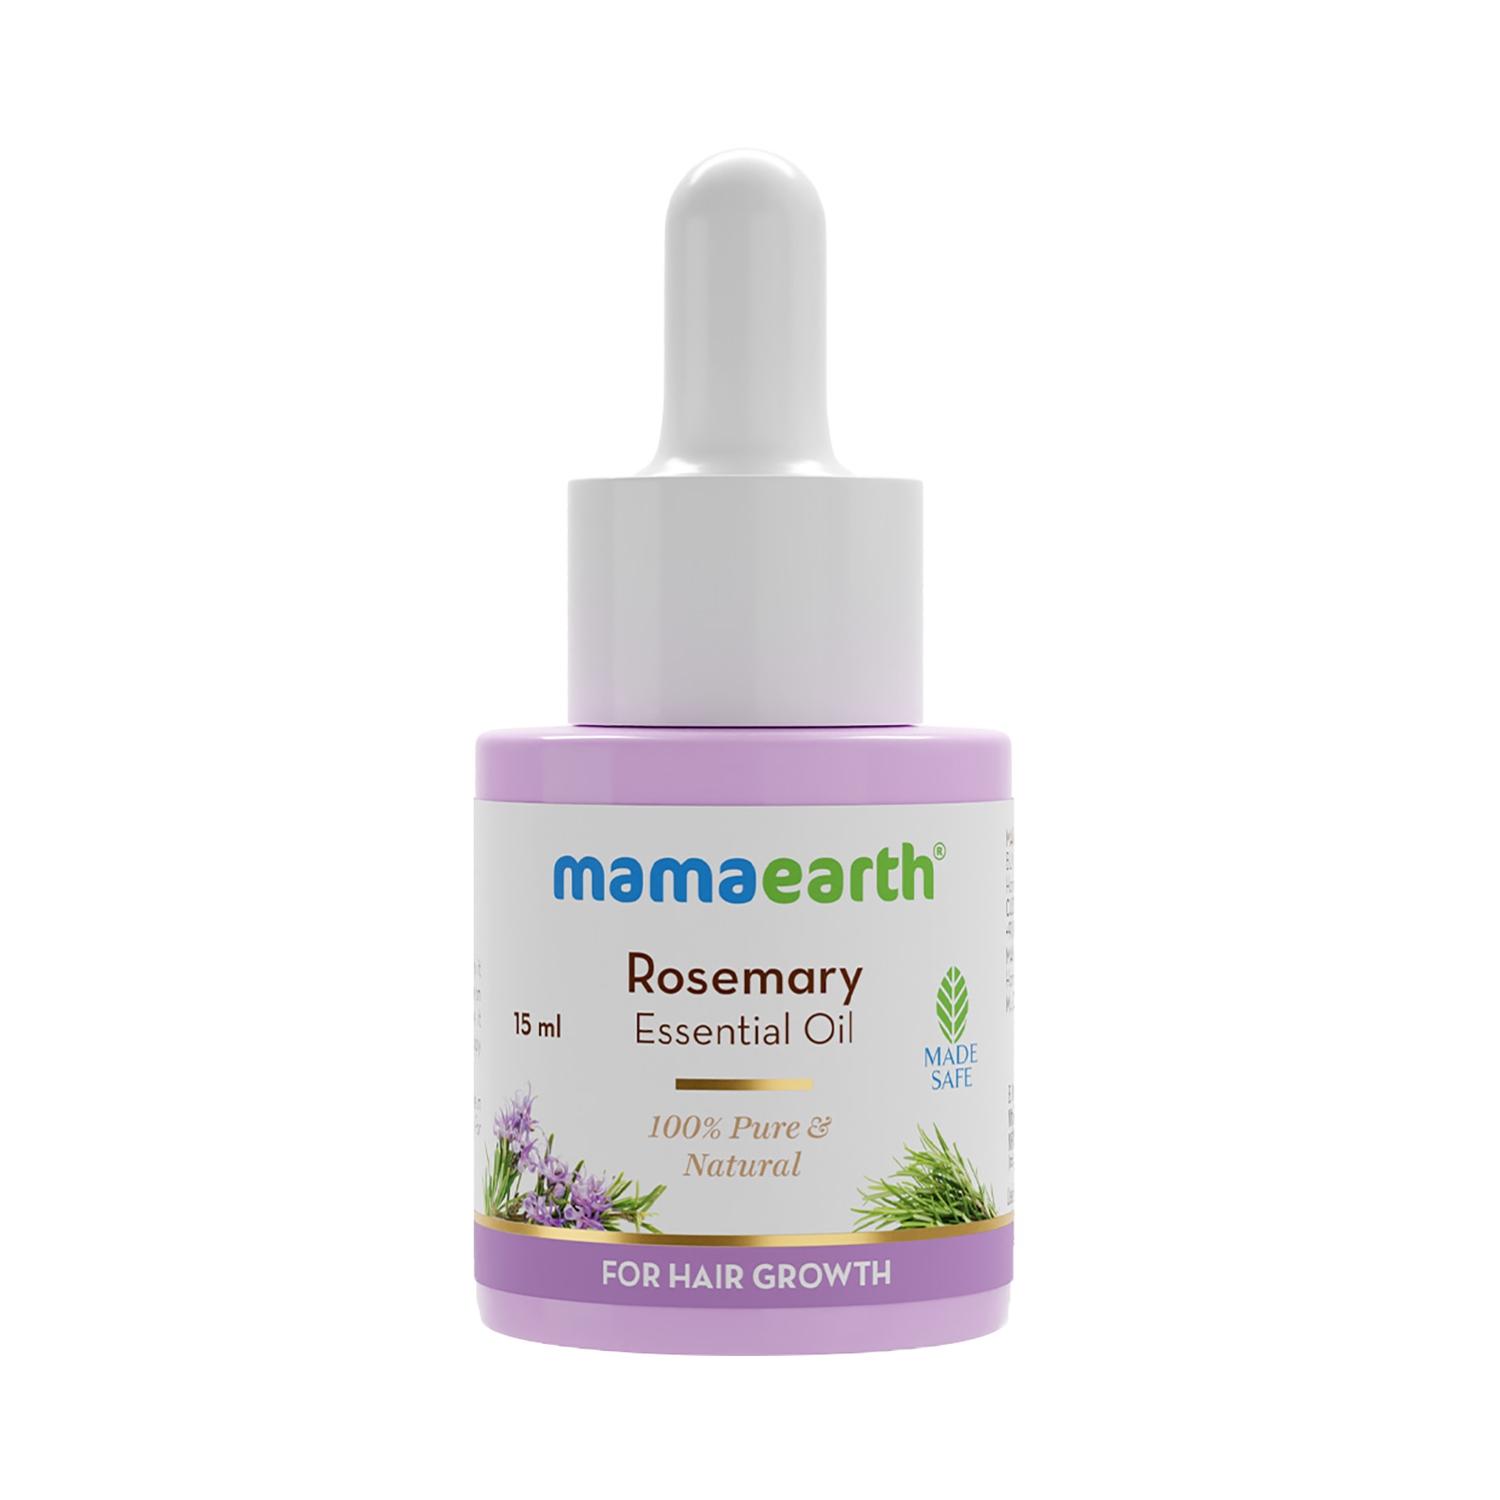 mamaearth-rosemary-essential-oil-for-hair-growth-(15ml)